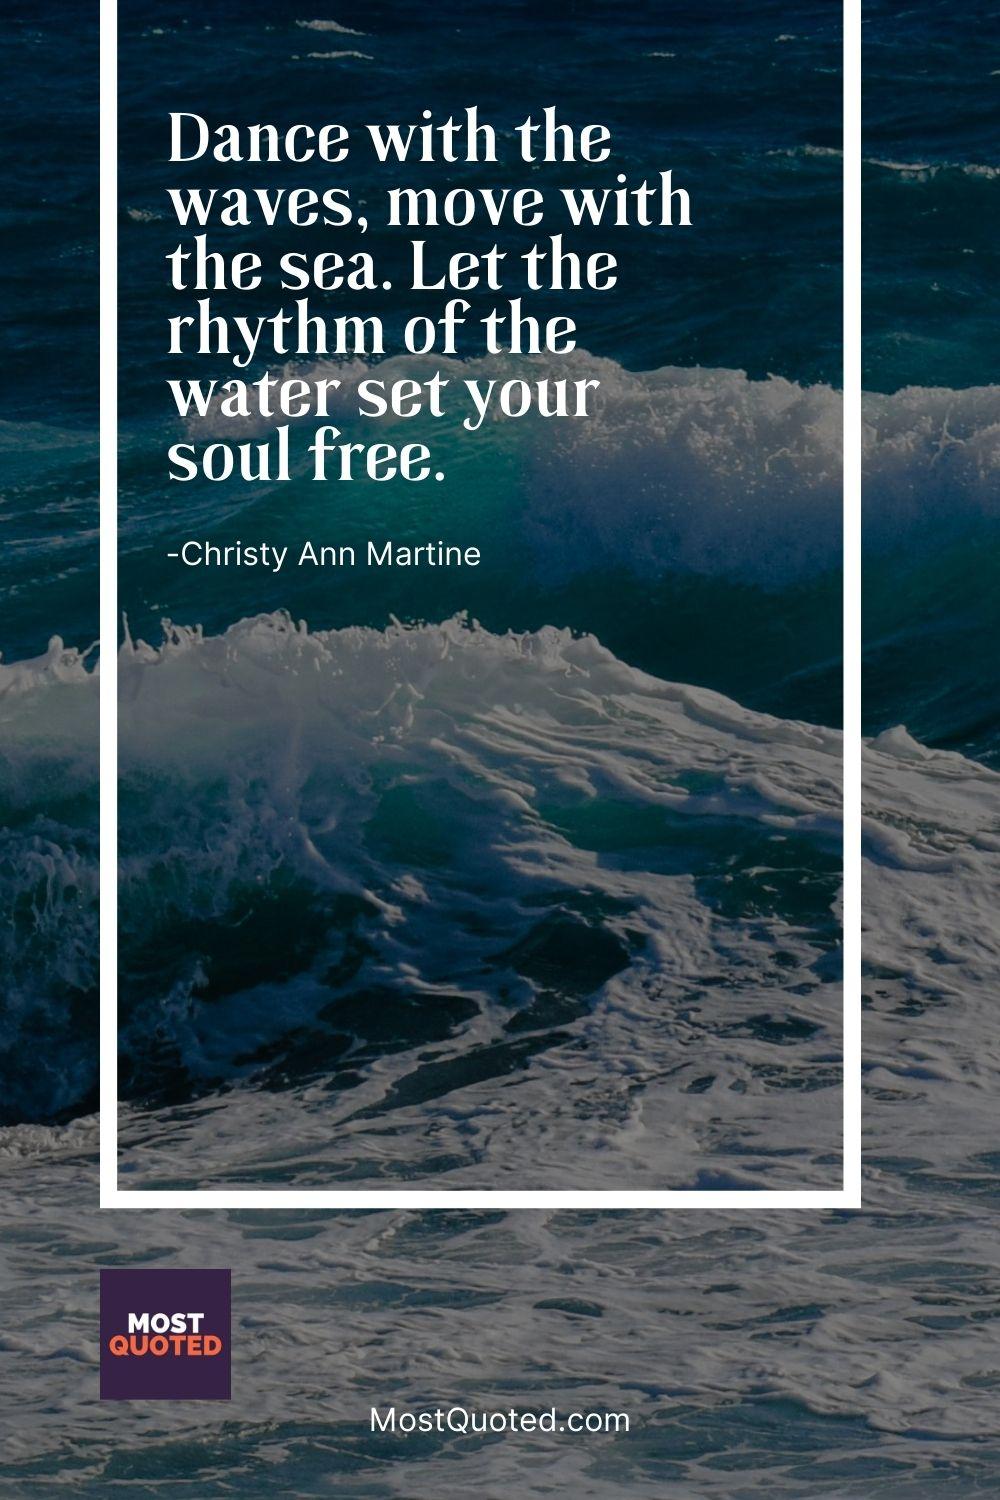 Dance with the waves, move with the sea. Let the rhythm of the water set your soul free. - Christy Ann Martine